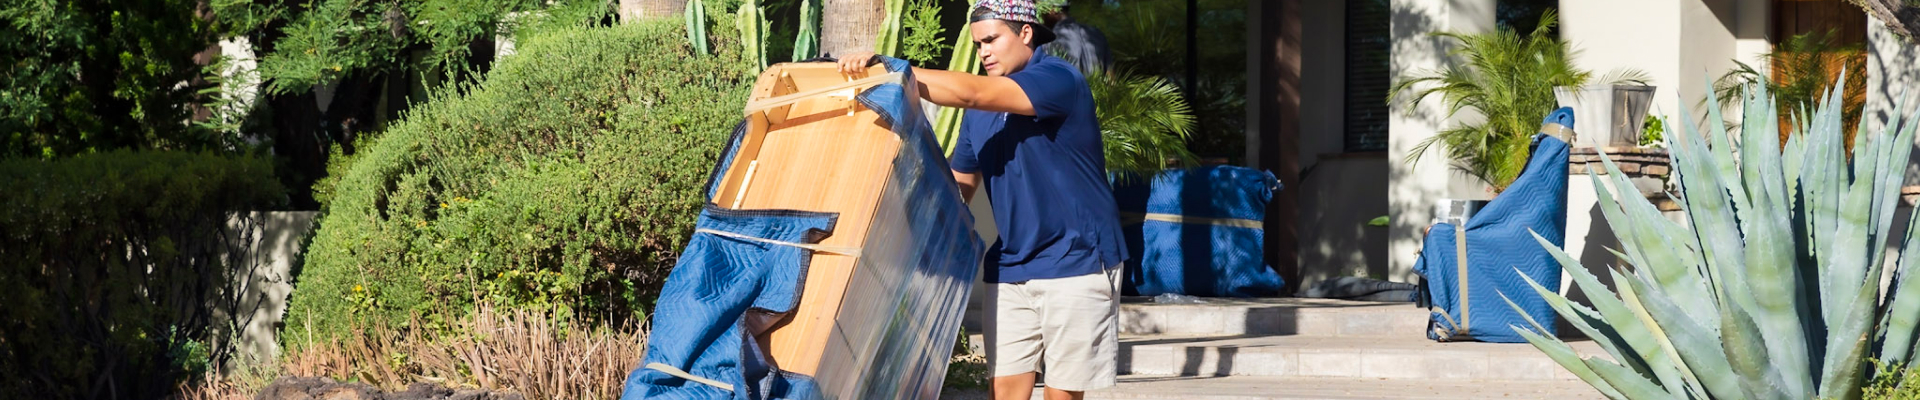 Packing and Storage Services - Just-in Time Moving and Storage